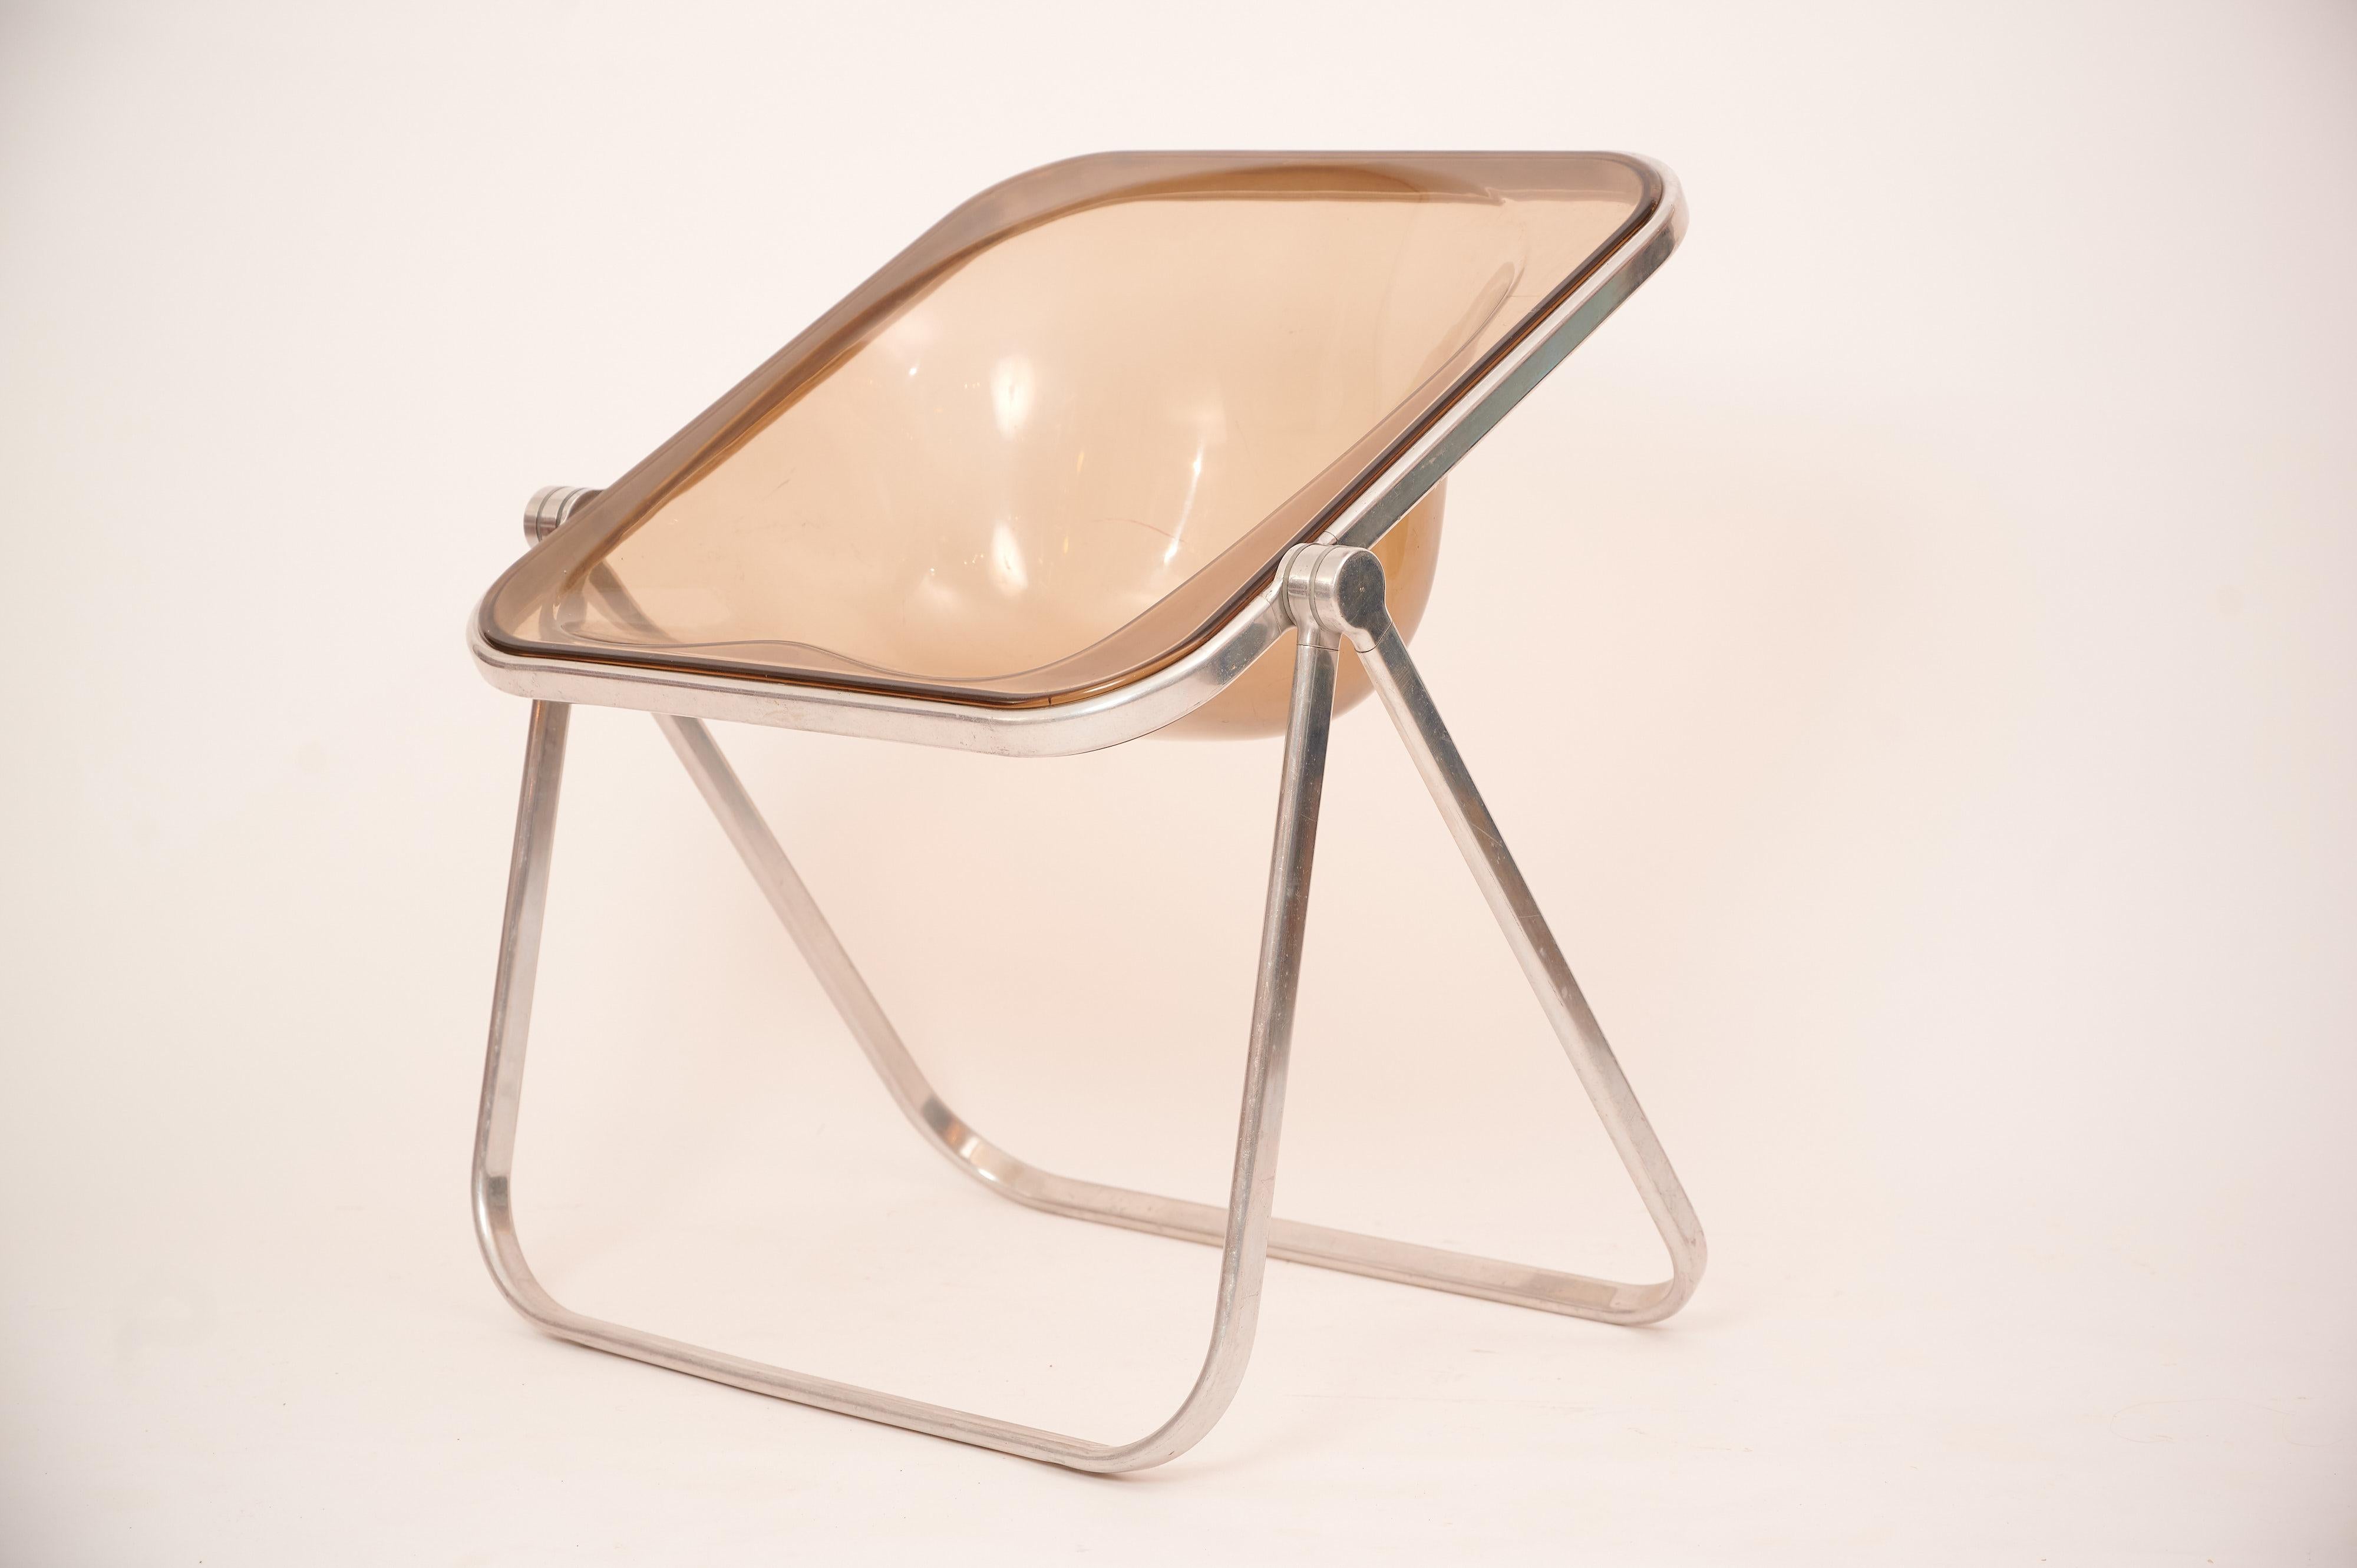 Mid-20th Century Plona Chairs in Beige Smoked Lucite